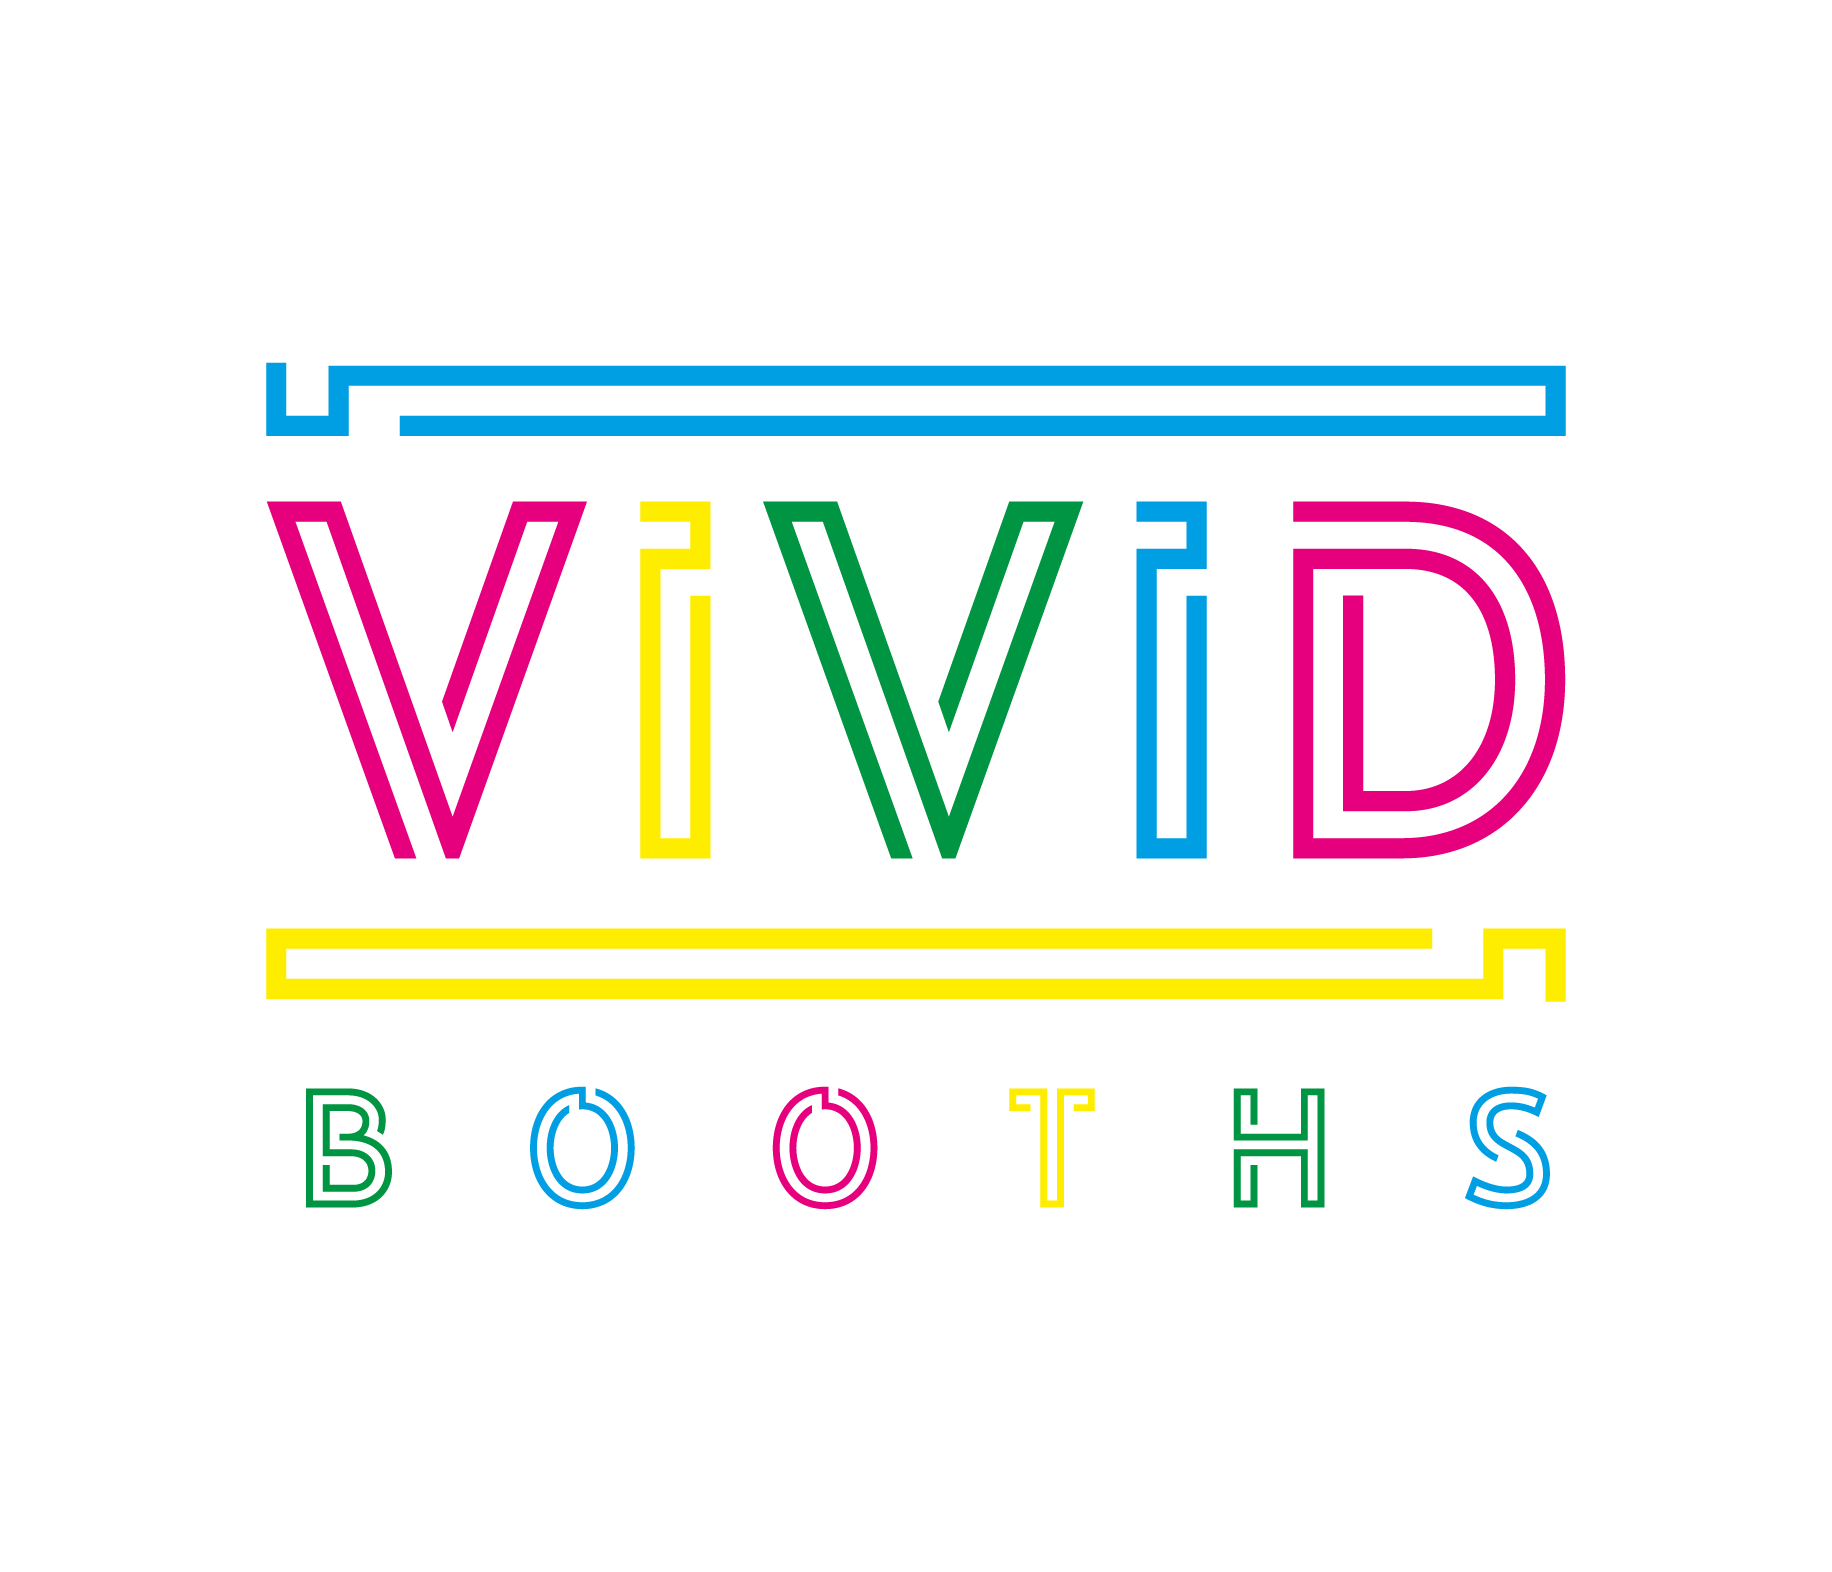 Vivid Booths Photo Booth Hire London